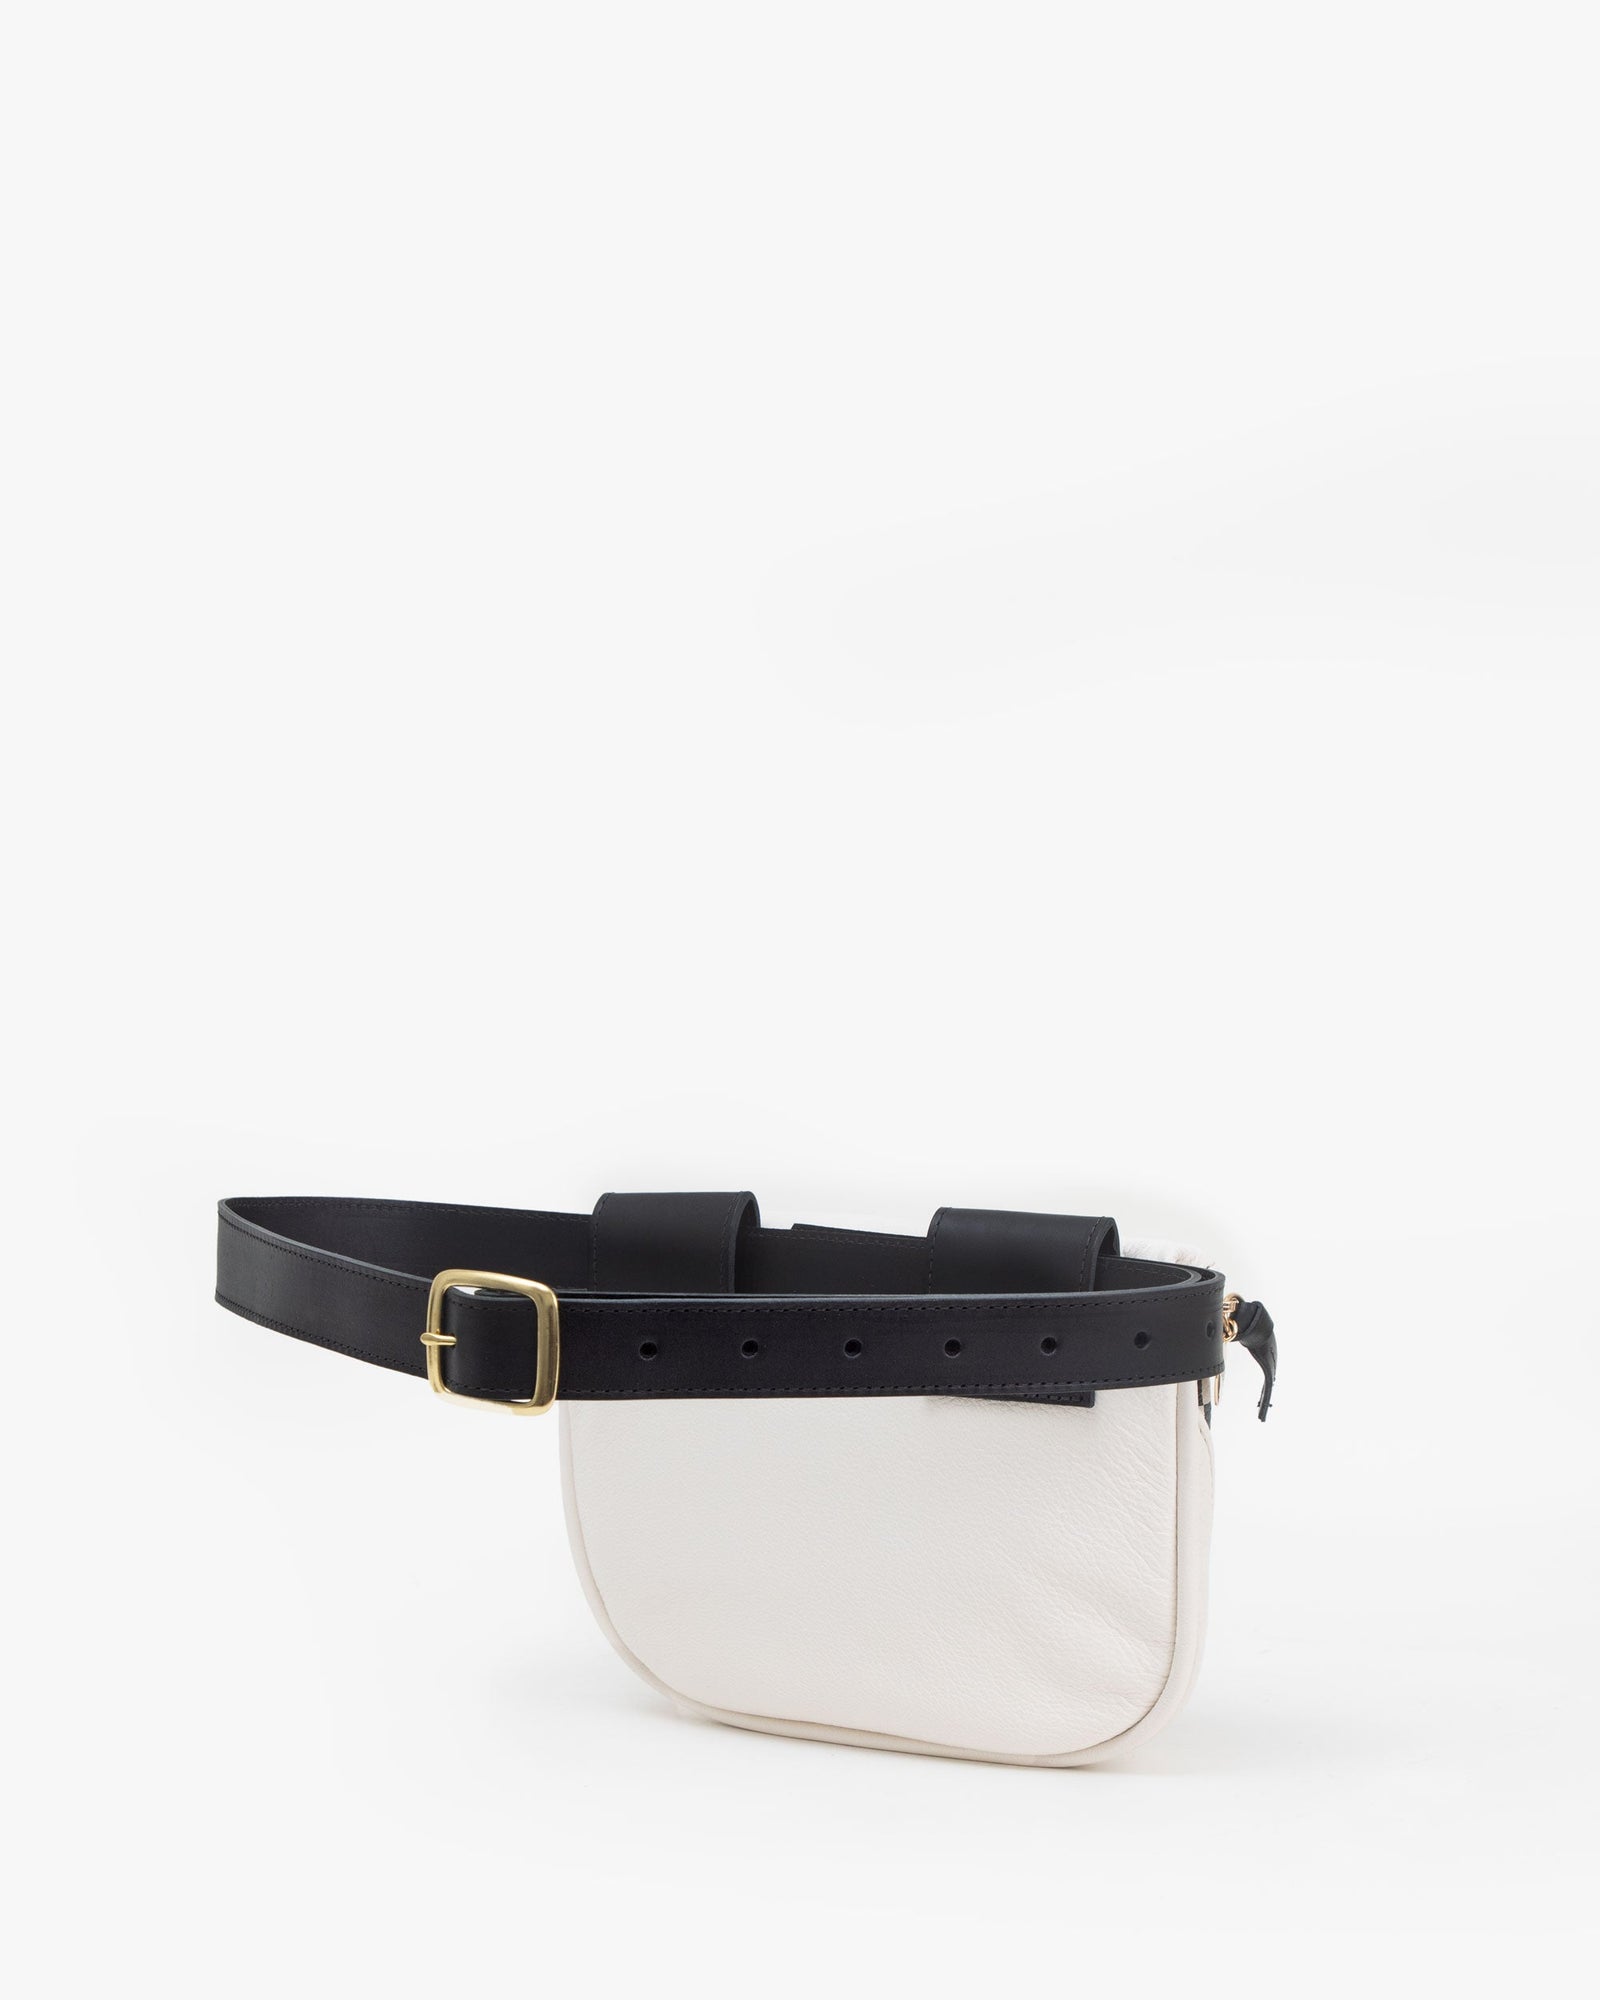 Cream with Black Checkers Fanny Pack - Back